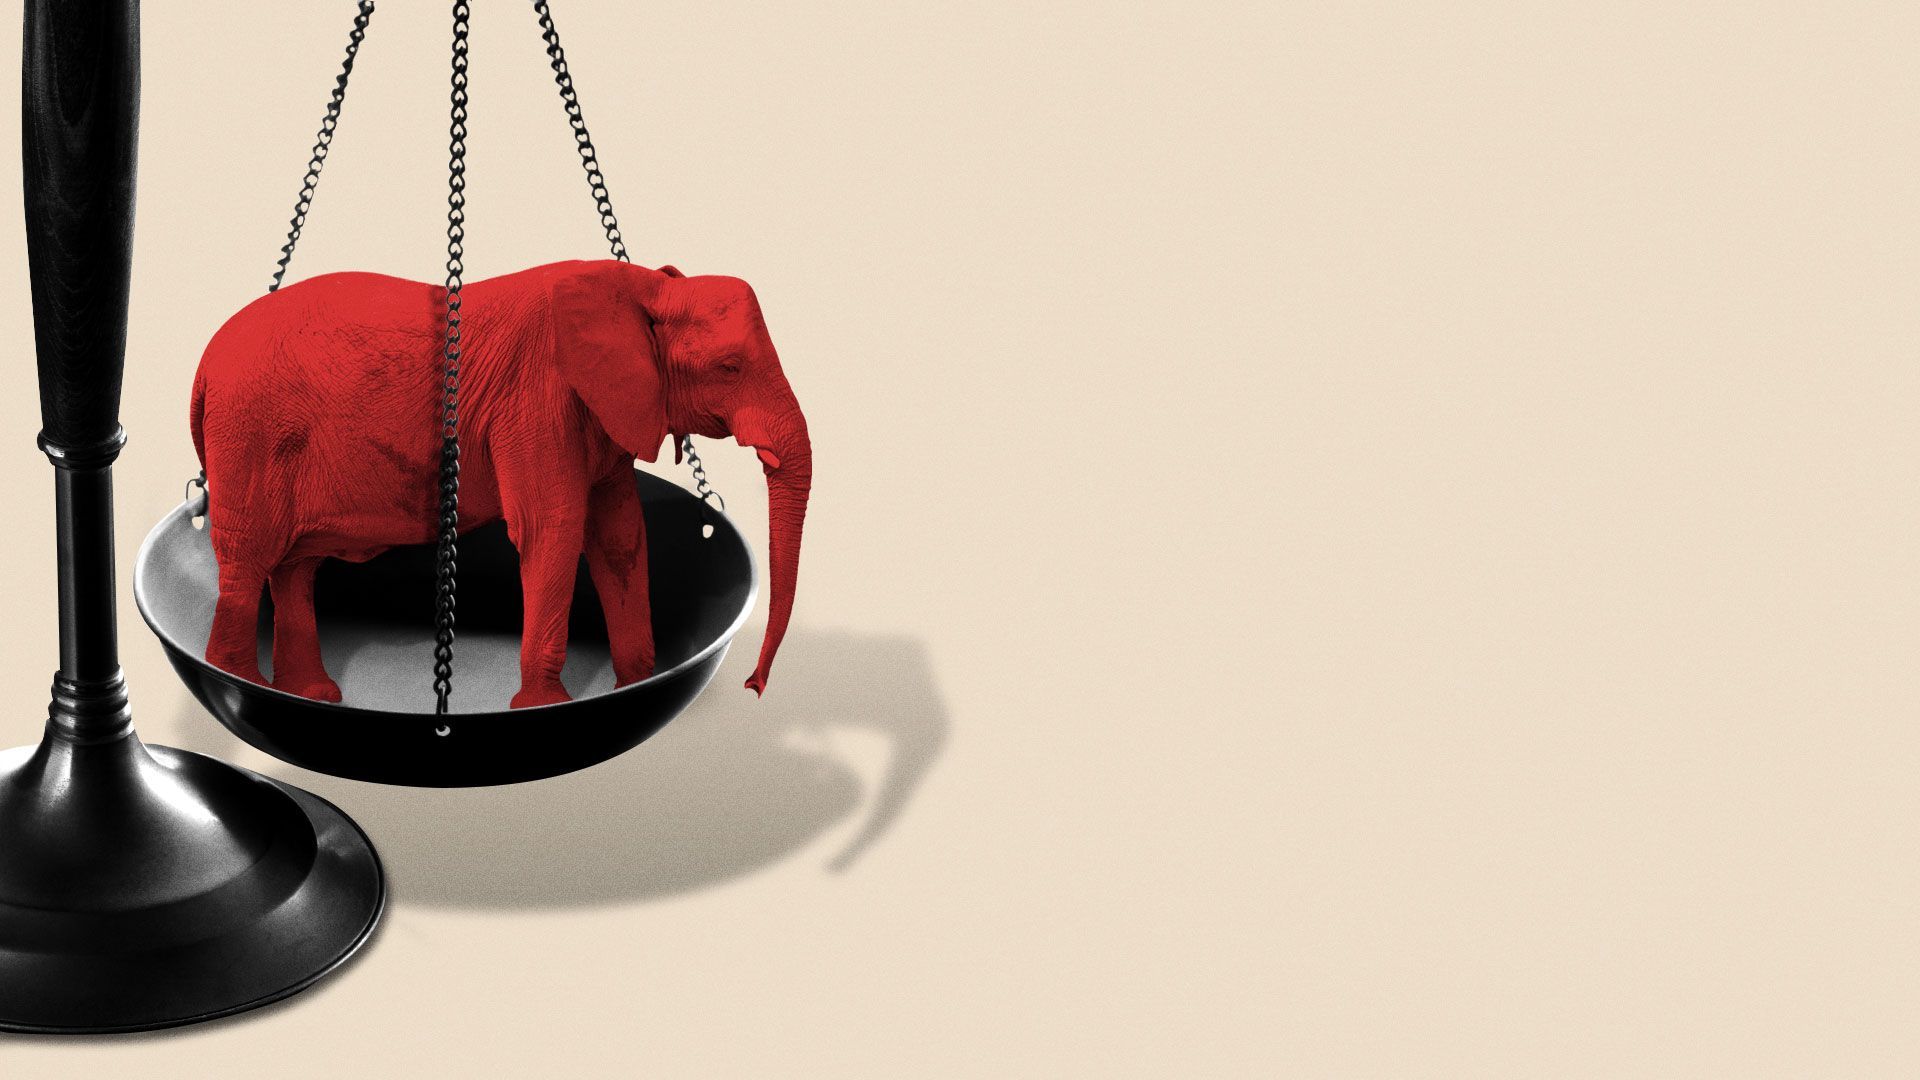 Illustration of scales of justice weighted down by an elephant